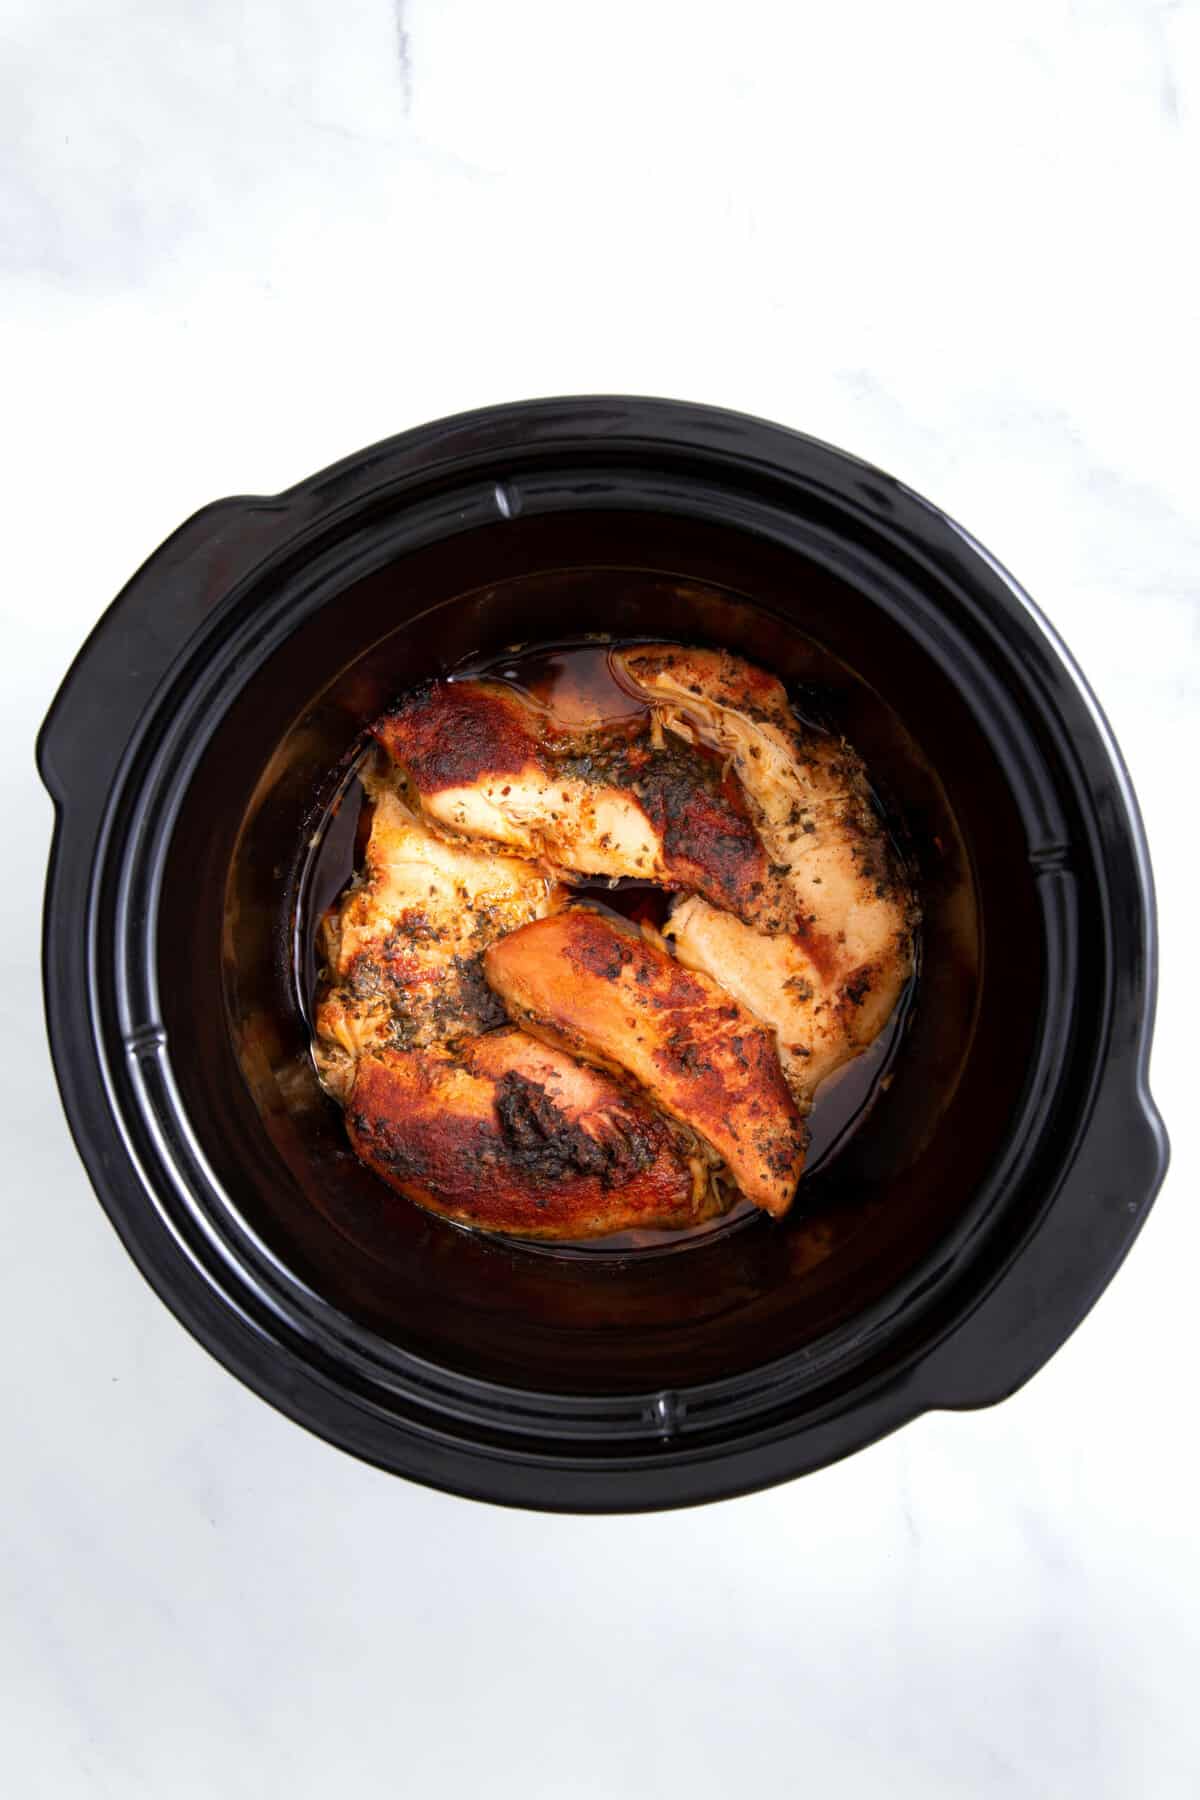 cooked chicken in a slow cooker